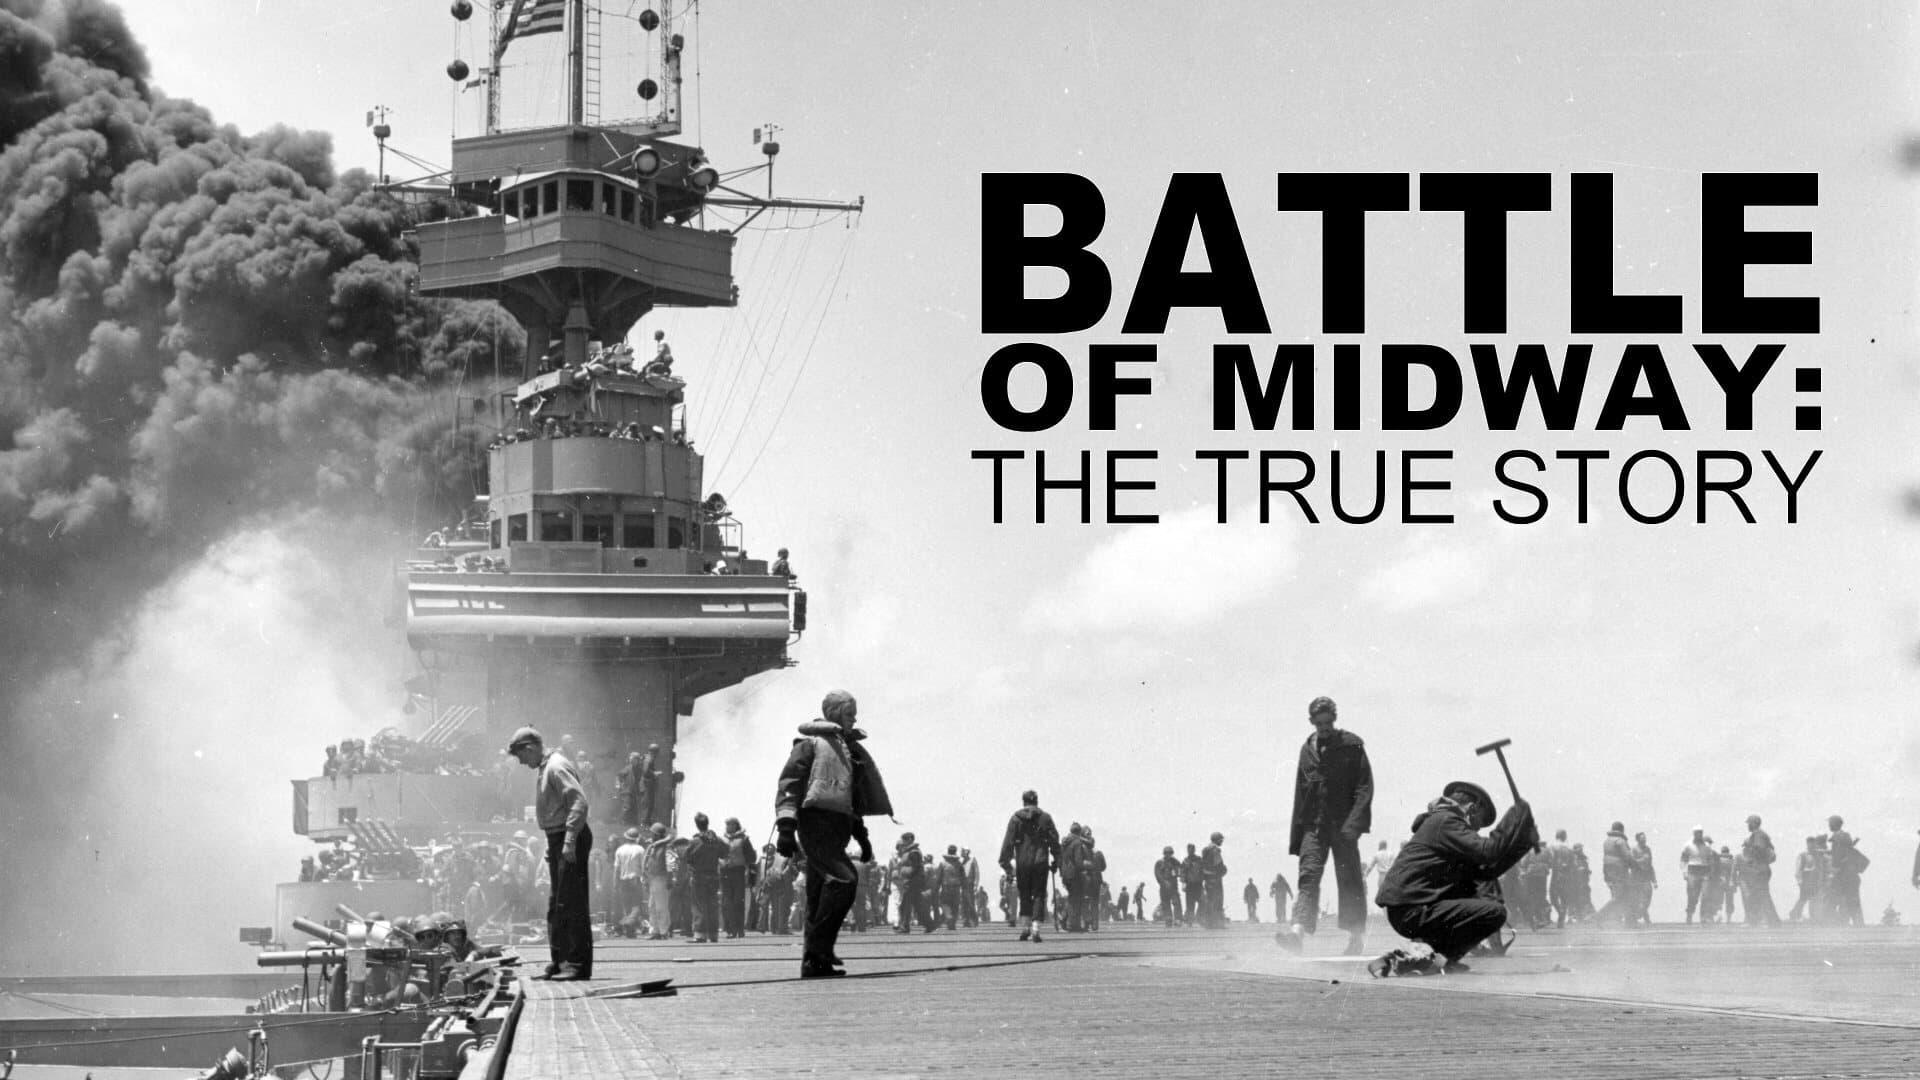 Battle of Midway: The True Story backdrop